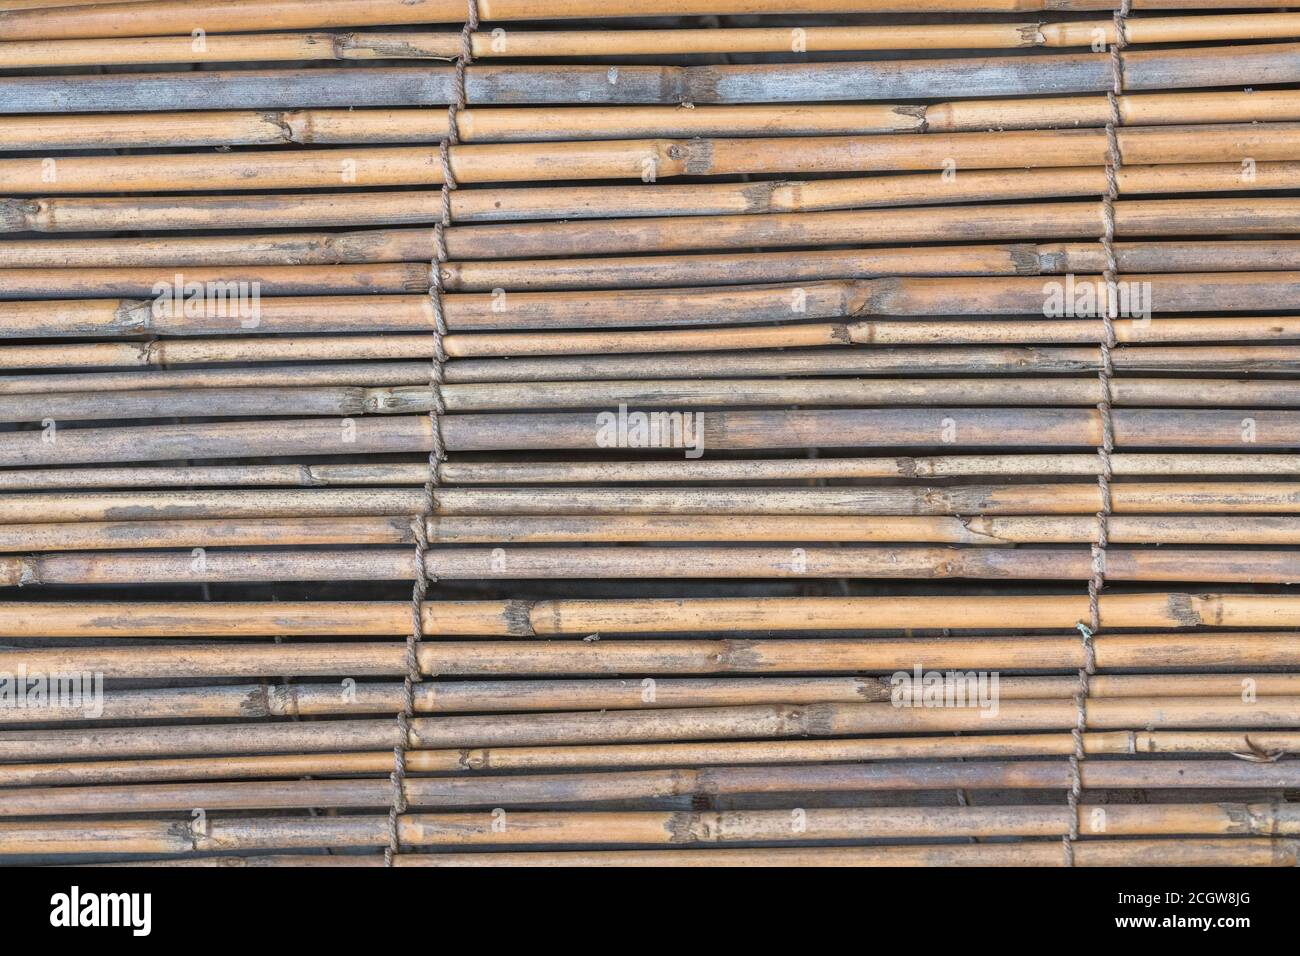 Flat lying section of natural reed garden screening, showing traces of early reed decay. Nice natural texture background or metaphor for gardening. Stock Photo